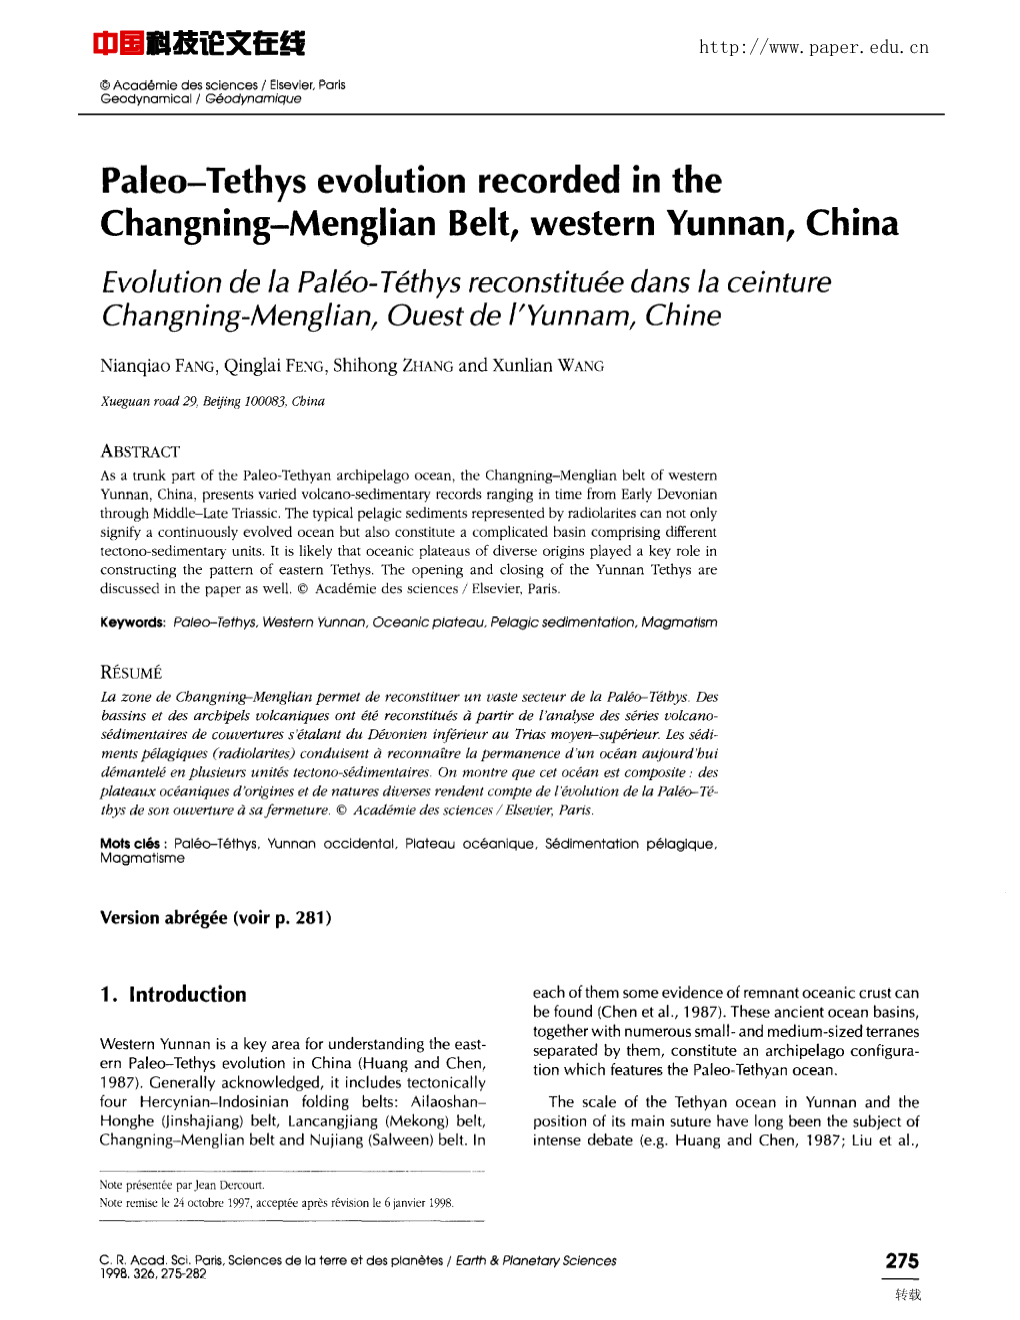 Paleo-Tethys Evolution Recorded in the Changning-Menglian Belt, Western Yunnan, China